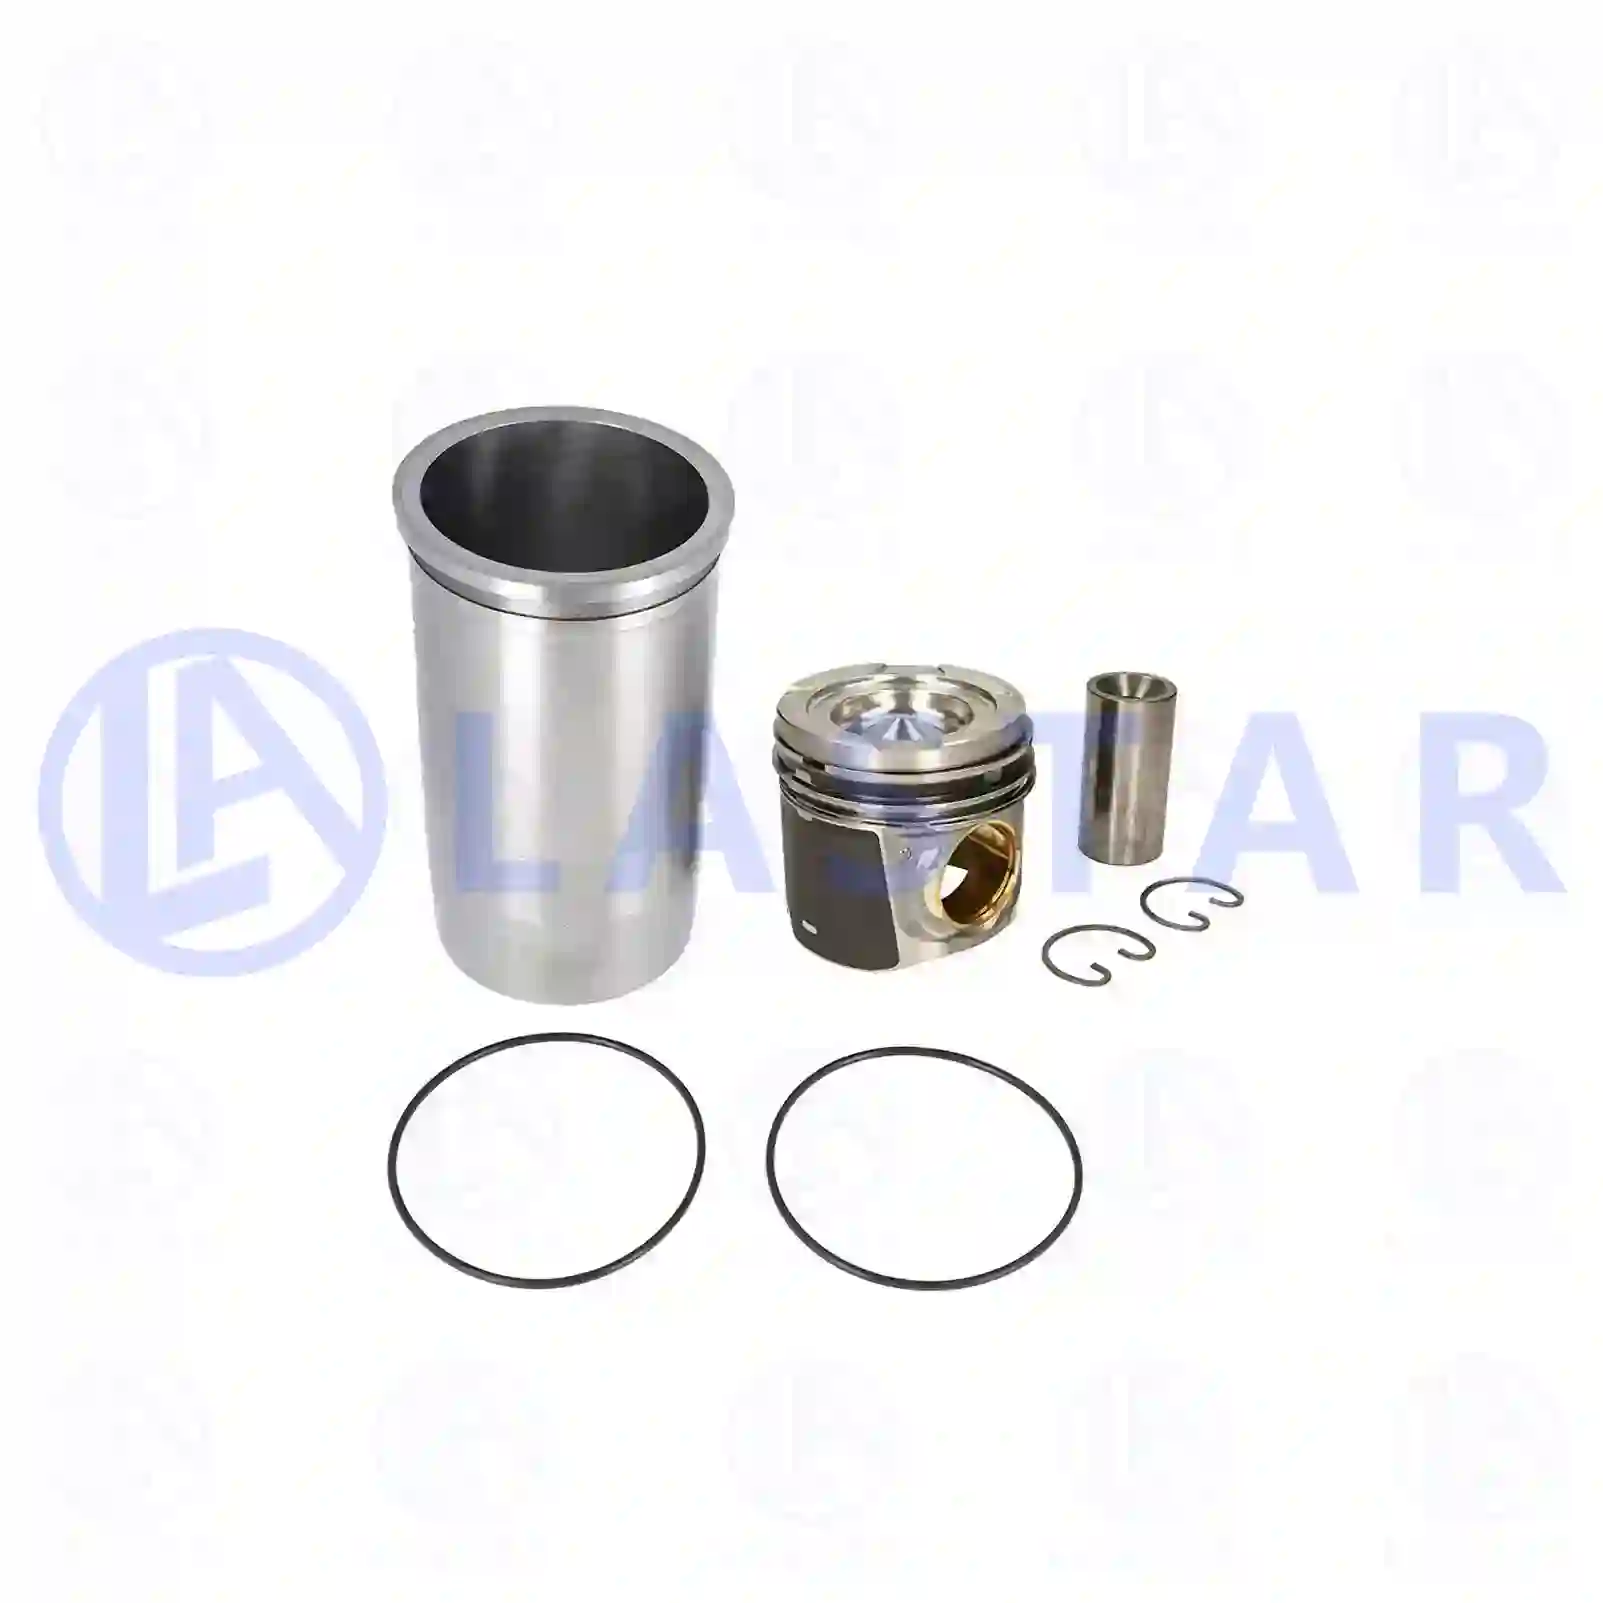 Piston with liner, 77700083, 51025006288S ||  77700083 Lastar Spare Part | Truck Spare Parts, Auotomotive Spare Parts Piston with liner, 77700083, 51025006288S ||  77700083 Lastar Spare Part | Truck Spare Parts, Auotomotive Spare Parts